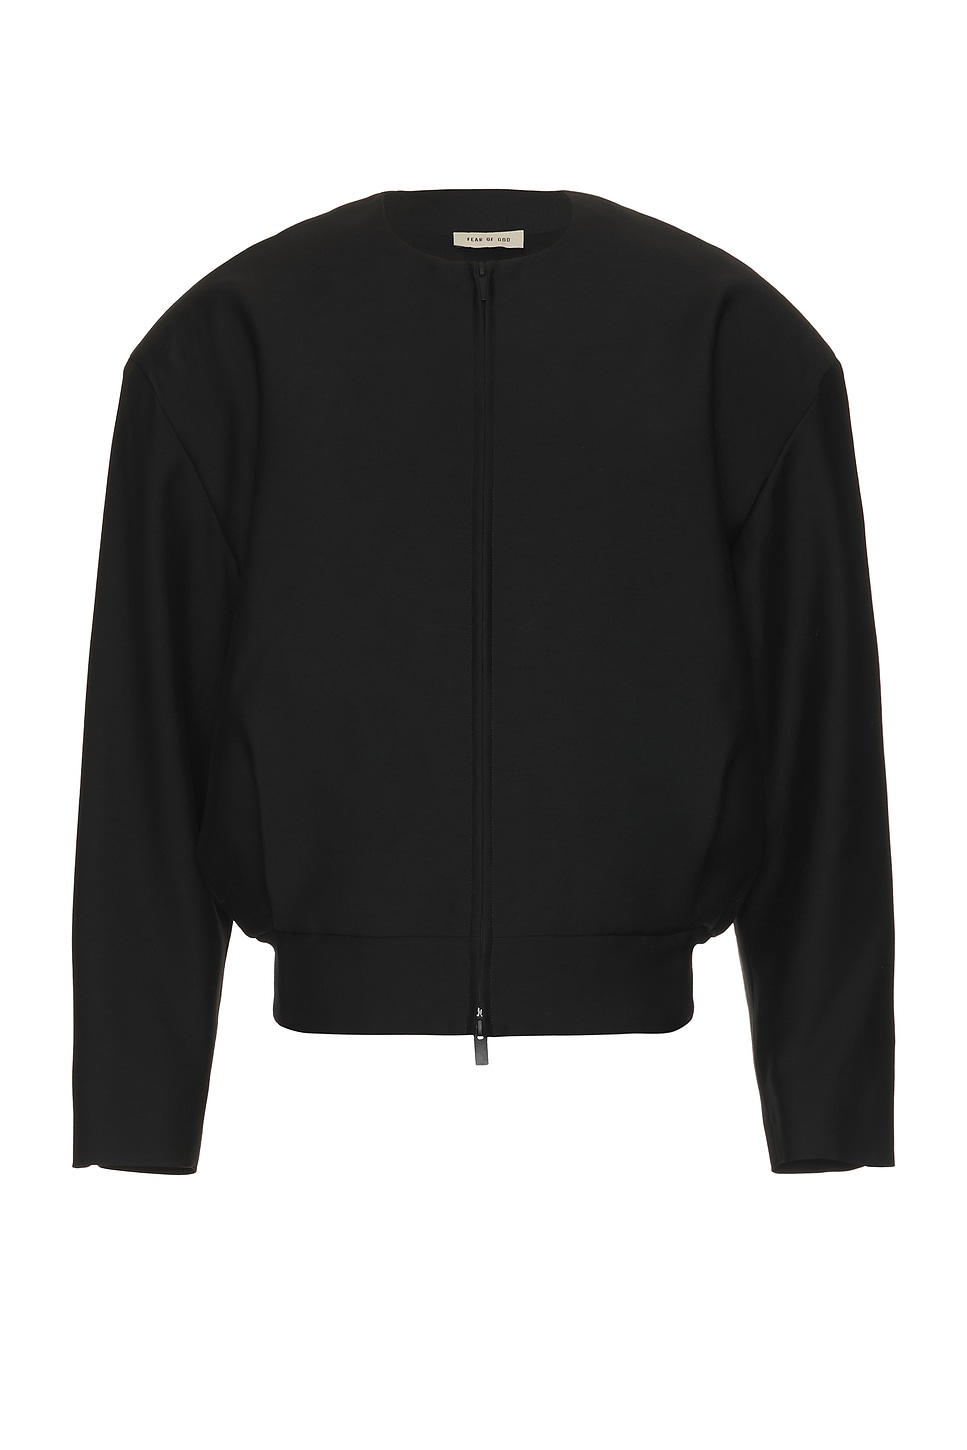 Image 1 of Fear of God Wool Silk Collarless Jacket in Black